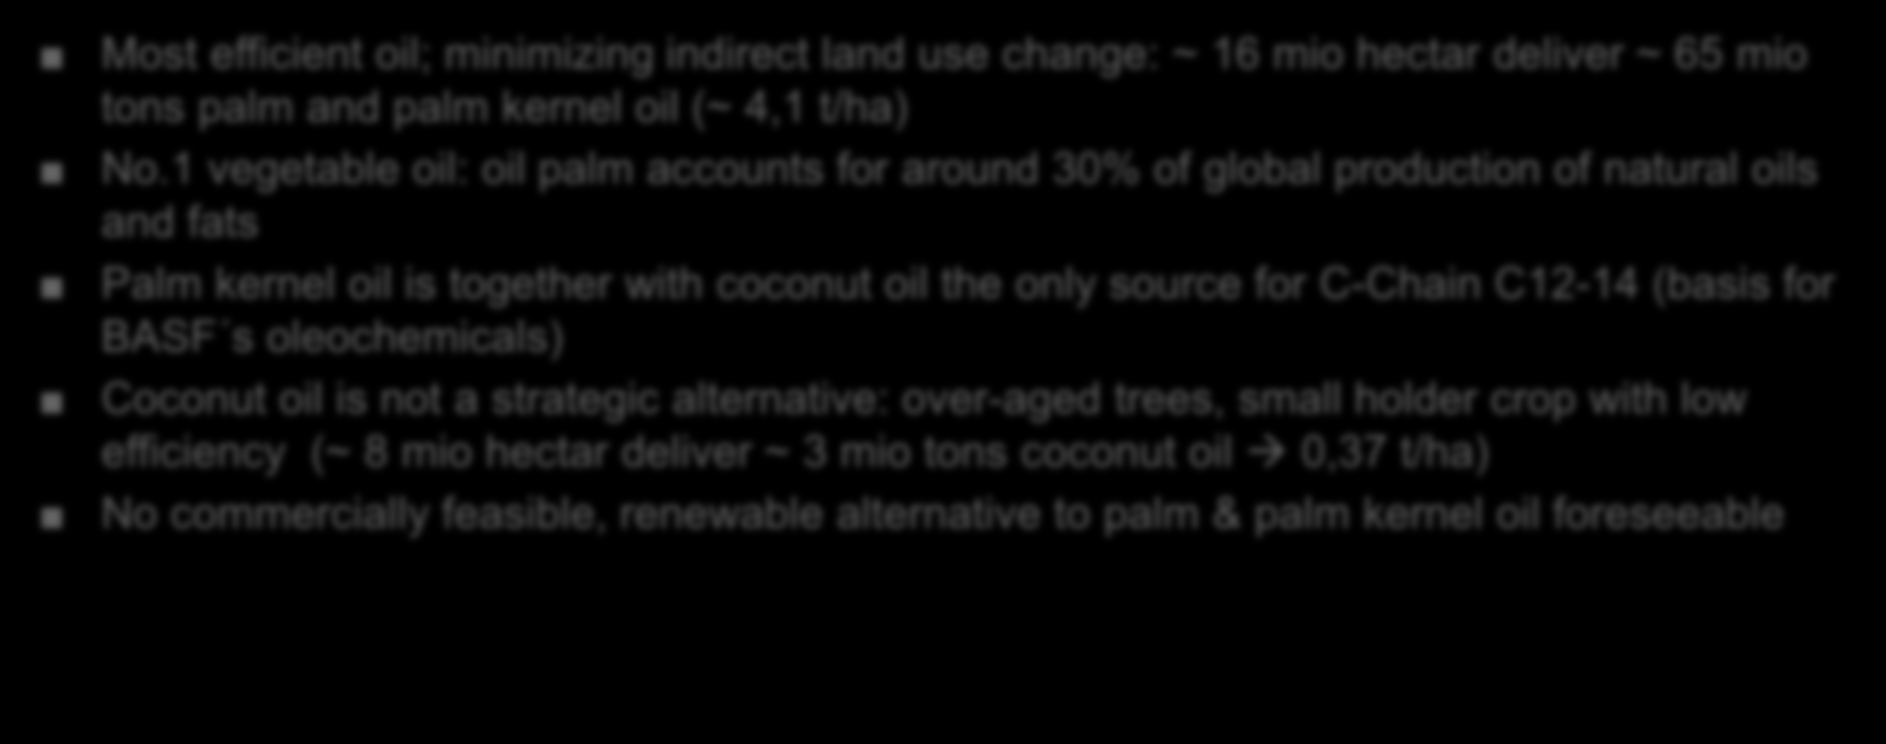 There is no alternative to palm in the oleochemistry industry Most efficient oil; minimizing indirect land use change: ~ 16 mio hectar deliver ~ 65 mio tons palm